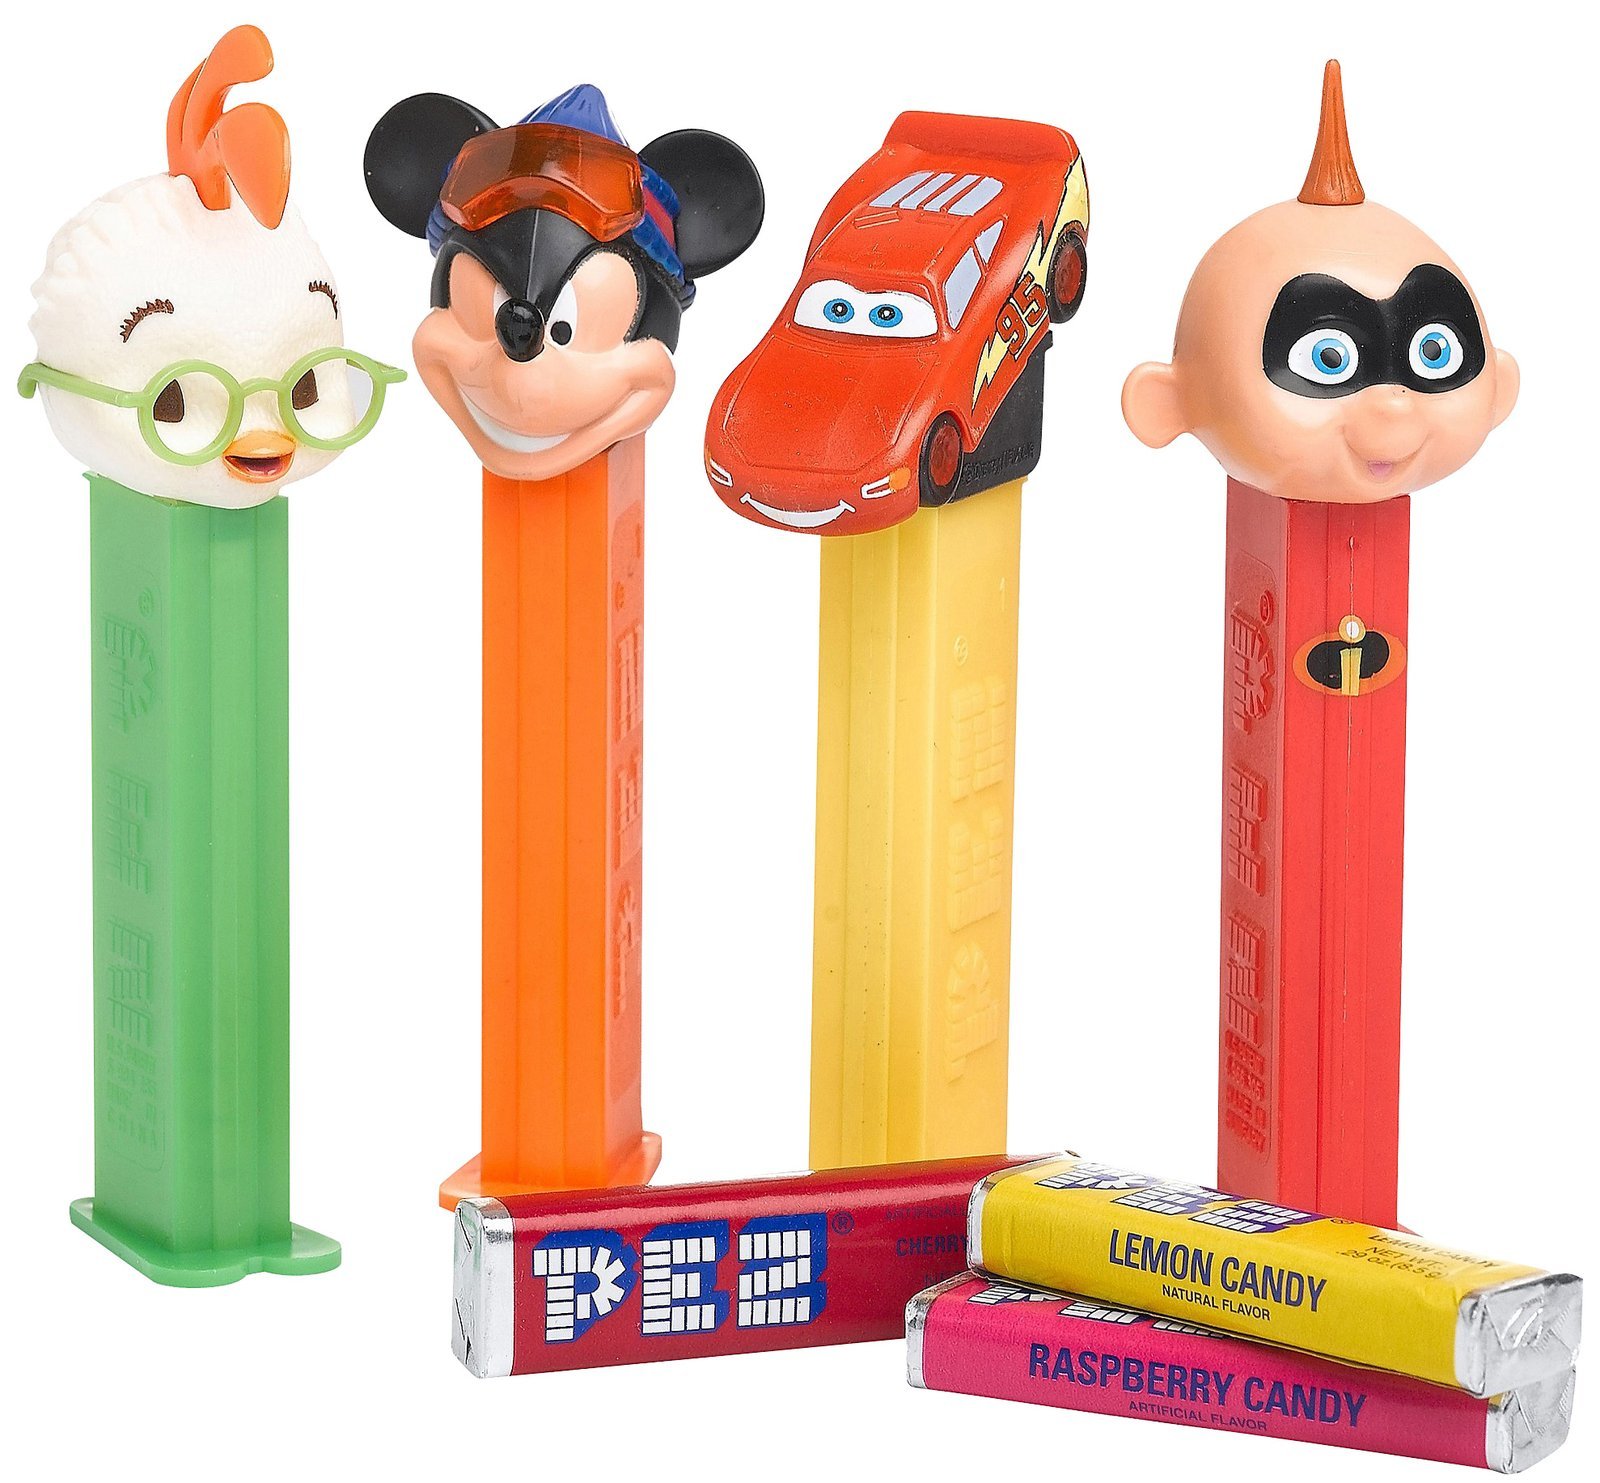 When someone says Pez I think of these XD.